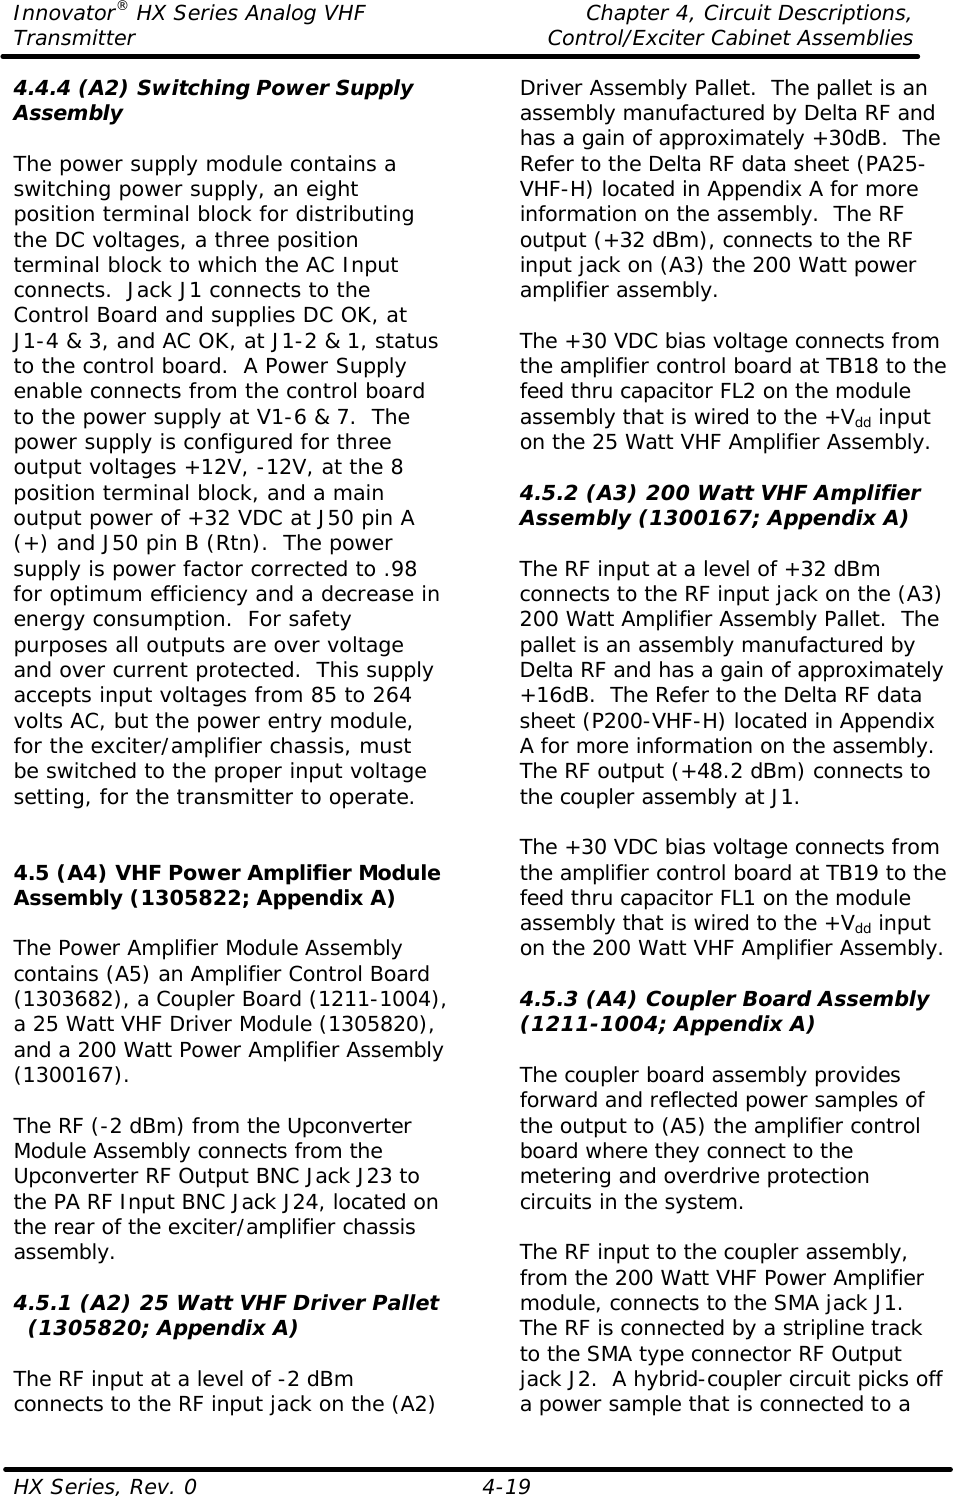 Innovator® HX Series Analog VHF    Chapter 4, Circuit Descriptions, Transmitter Control/Exciter Cabinet Assemblies  HX Series, Rev. 0    4-19 4.4.4 (A2) Switching Power Supply Assembly  The power supply module contains a switching power supply, an eight position terminal block for distributing the DC voltages, a three position terminal block to which the AC Input connects.  Jack J1 connects to the Control Board and supplies DC OK, at J1-4 &amp; 3, and AC OK, at J1-2 &amp; 1, status to the control board.  A Power Supply enable connects from the control board to the power supply at V1-6 &amp; 7.  The power supply is configured for three output voltages +12V, -12V, at the 8 position terminal block, and a main output power of +32 VDC at J50 pin A (+) and J50 pin B (Rtn).  The power supply is power factor corrected to .98 for optimum efficiency and a decrease in energy consumption.  For safety purposes all outputs are over voltage and over current protected.  This supply accepts input voltages from 85 to 264 volts AC, but the power entry module, for the exciter/amplifier chassis, must be switched to the proper input voltage setting, for the transmitter to operate.   4.5 (A4) VHF Power Amplifier Module Assembly (1305822; Appendix A)  The Power Amplifier Module Assembly contains (A5) an Amplifier Control Board (1303682), a Coupler Board (1211-1004), a 25 Watt VHF Driver Module (1305820), and a 200 Watt Power Amplifier Assembly (1300167).  The RF (-2 dBm) from the Upconverter Module Assembly connects from the Upconverter RF Output BNC Jack J23 to the PA RF Input BNC Jack J24, located on the rear of the exciter/amplifier chassis assembly.  4.5.1 (A2) 25 Watt VHF Driver Pallet   (1305820; Appendix A)  The RF input at a level of -2 dBm connects to the RF input jack on the (A2) Driver Assembly Pallet.  The pallet is an assembly manufactured by Delta RF and has a gain of approximately +30dB.  The Refer to the Delta RF data sheet (PA25-VHF-H) located in Appendix A for more information on the assembly.  The RF output (+32 dBm), connects to the RF input jack on (A3) the 200 Watt power amplifier assembly.  The +30 VDC bias voltage connects from the amplifier control board at TB18 to the feed thru capacitor FL2 on the module assembly that is wired to the +Vdd input on the 25 Watt VHF Amplifier Assembly.  4.5.2 (A3) 200 Watt VHF Amplifier Assembly (1300167; Appendix A)  The RF input at a level of +32 dBm connects to the RF input jack on the (A3) 200 Watt Amplifier Assembly Pallet.  The pallet is an assembly manufactured by Delta RF and has a gain of approximately +16dB.  The Refer to the Delta RF data sheet (P200-VHF-H) located in Appendix A for more information on the assembly.  The RF output (+48.2 dBm) connects to the coupler assembly at J1.  The +30 VDC bias voltage connects from the amplifier control board at TB19 to the feed thru capacitor FL1 on the module assembly that is wired to the +Vdd input on the 200 Watt VHF Amplifier Assembly.  4.5.3 (A4) Coupler Board Assembly (1211-1004; Appendix A)  The coupler board assembly provides forward and reflected power samples of the output to (A5) the amplifier control board where they connect to the metering and overdrive protection circuits in the system.  The RF input to the coupler assembly, from the 200 Watt VHF Power Amplifier module, connects to the SMA jack J1.  The RF is connected by a stripline track to the SMA type connector RF Output jack J2.  A hybrid-coupler circuit picks off a power sample that is connected to a 